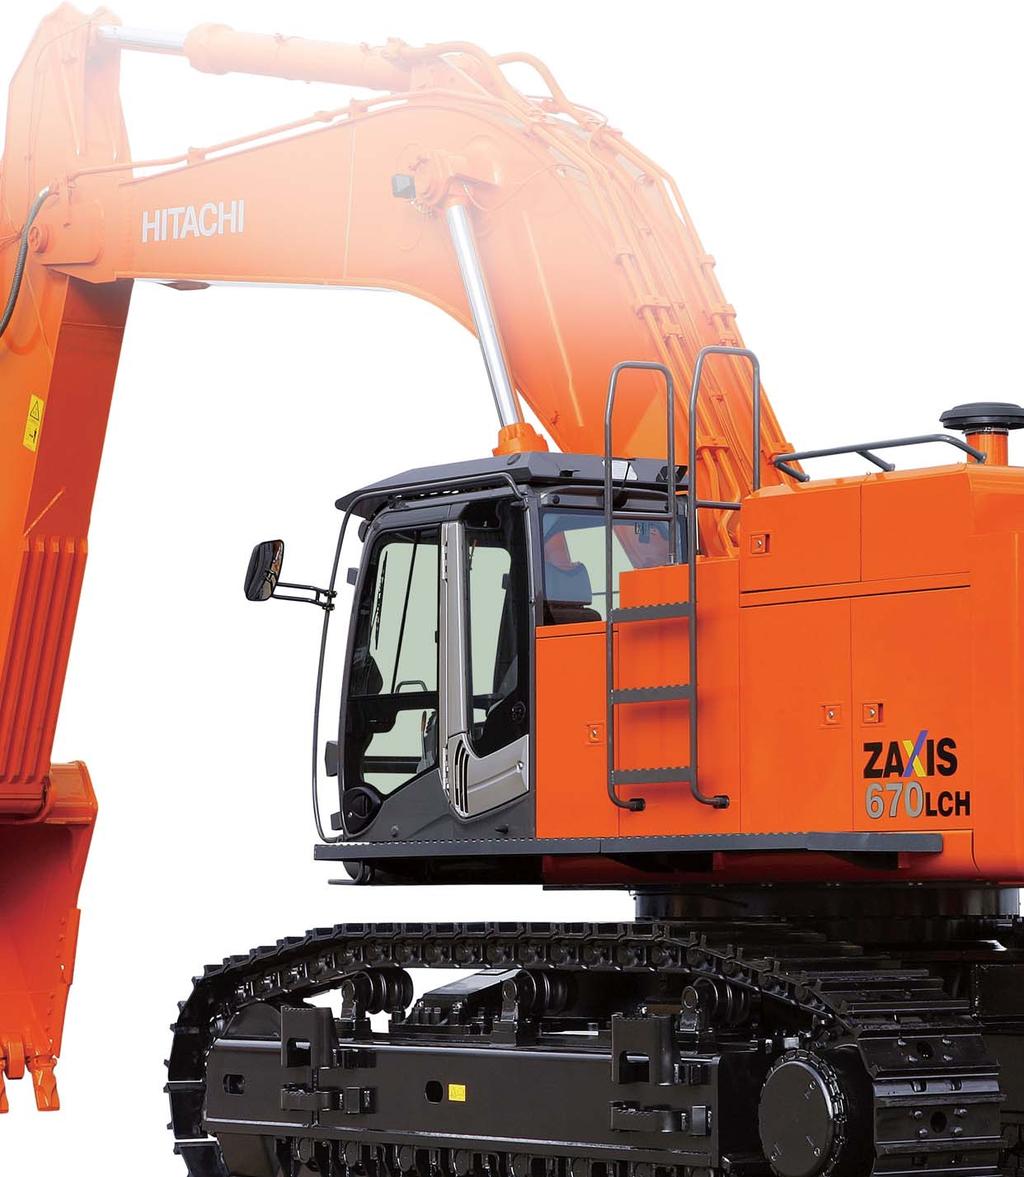 ZAXIS-3 series HYDRAULIC EXCAVATOR Model Code : ZX650LC-3 / ZX670LCH-3 Engine Rated Power : 345 kw (463 HP) Operating Weight : ZX650LC-3 : 65 900